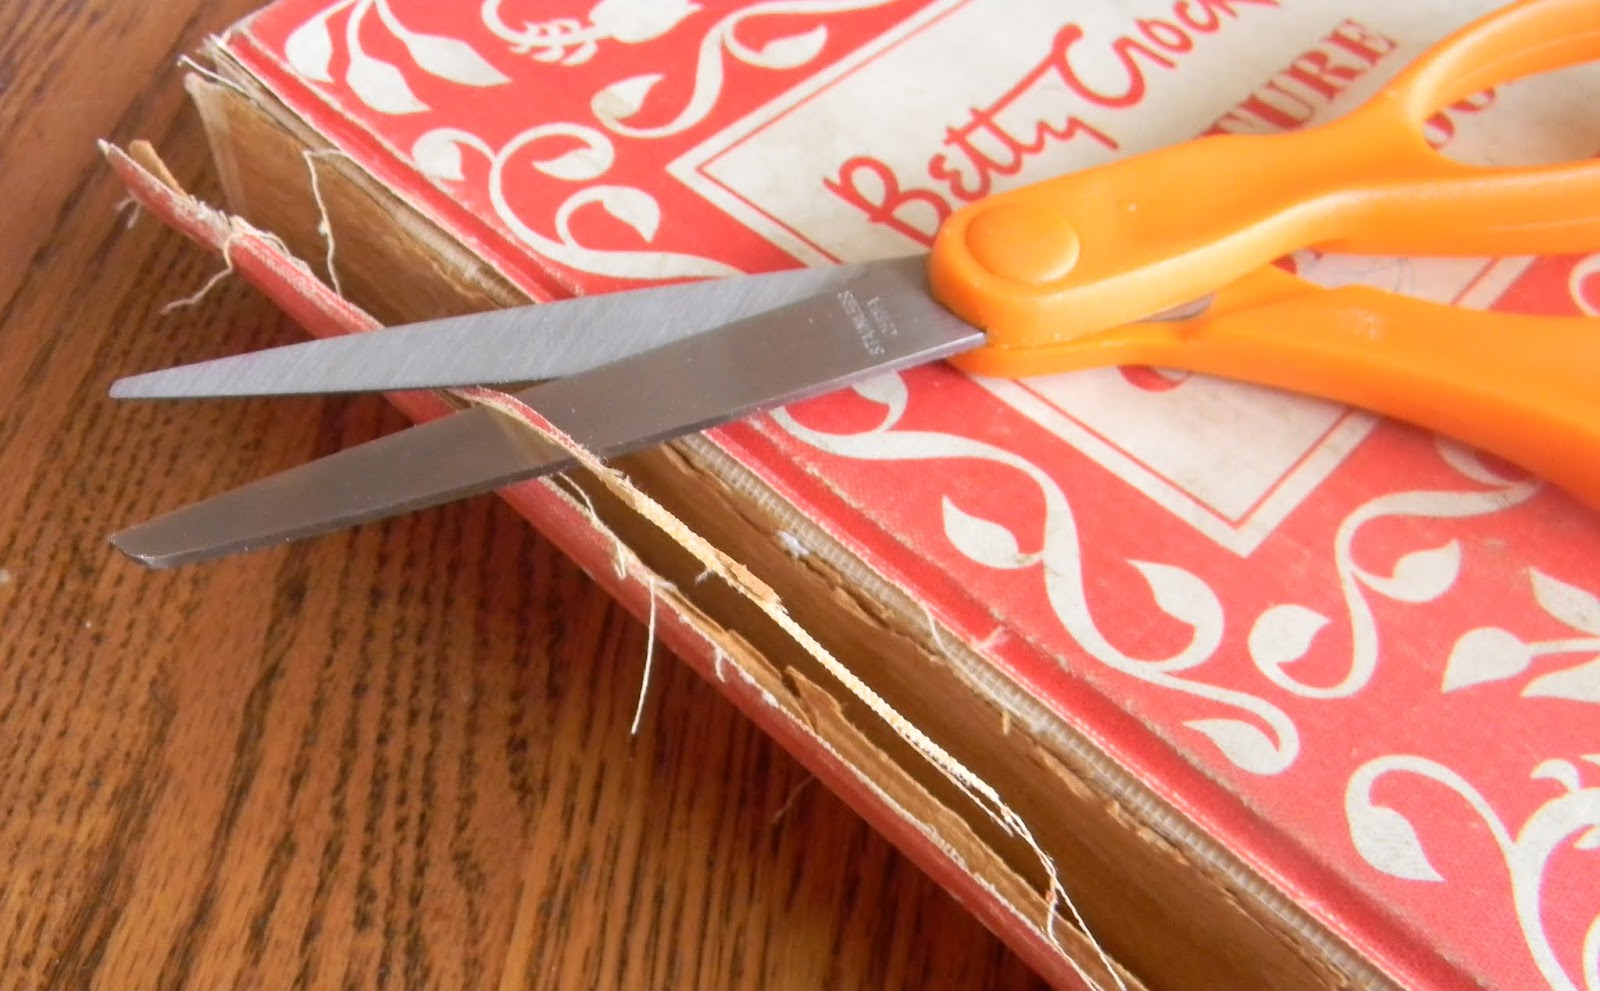 First, using the scissors, cut those fly away pieces off: